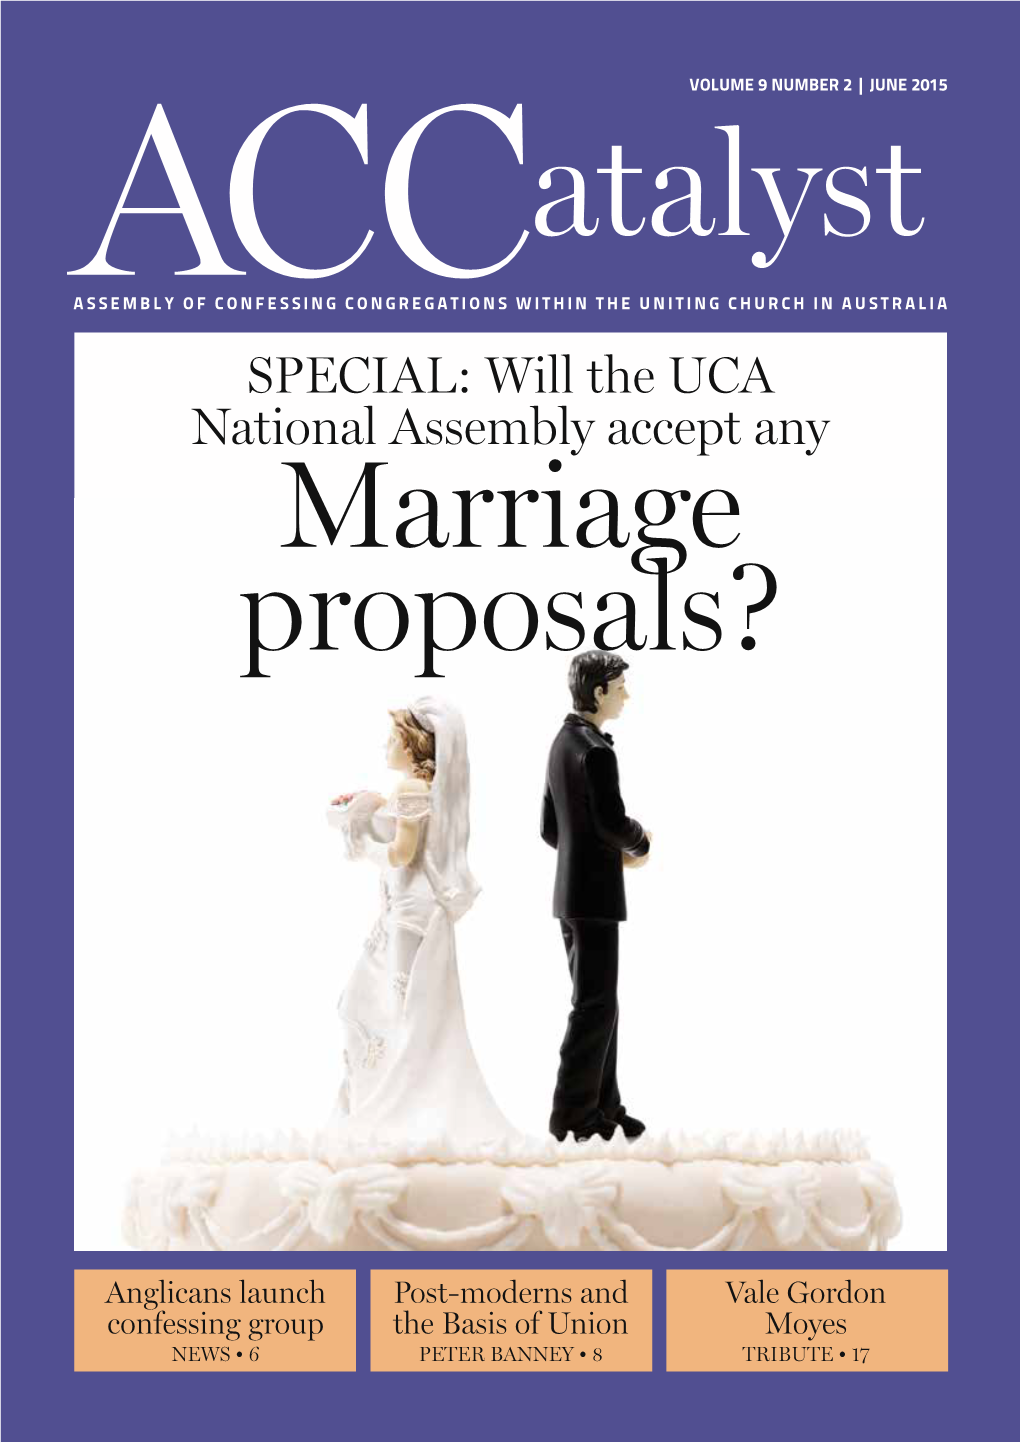 The Uniting Church in Australia SPECIAL: Will the UCA National Assembly Accept Any Marriage Proposals?